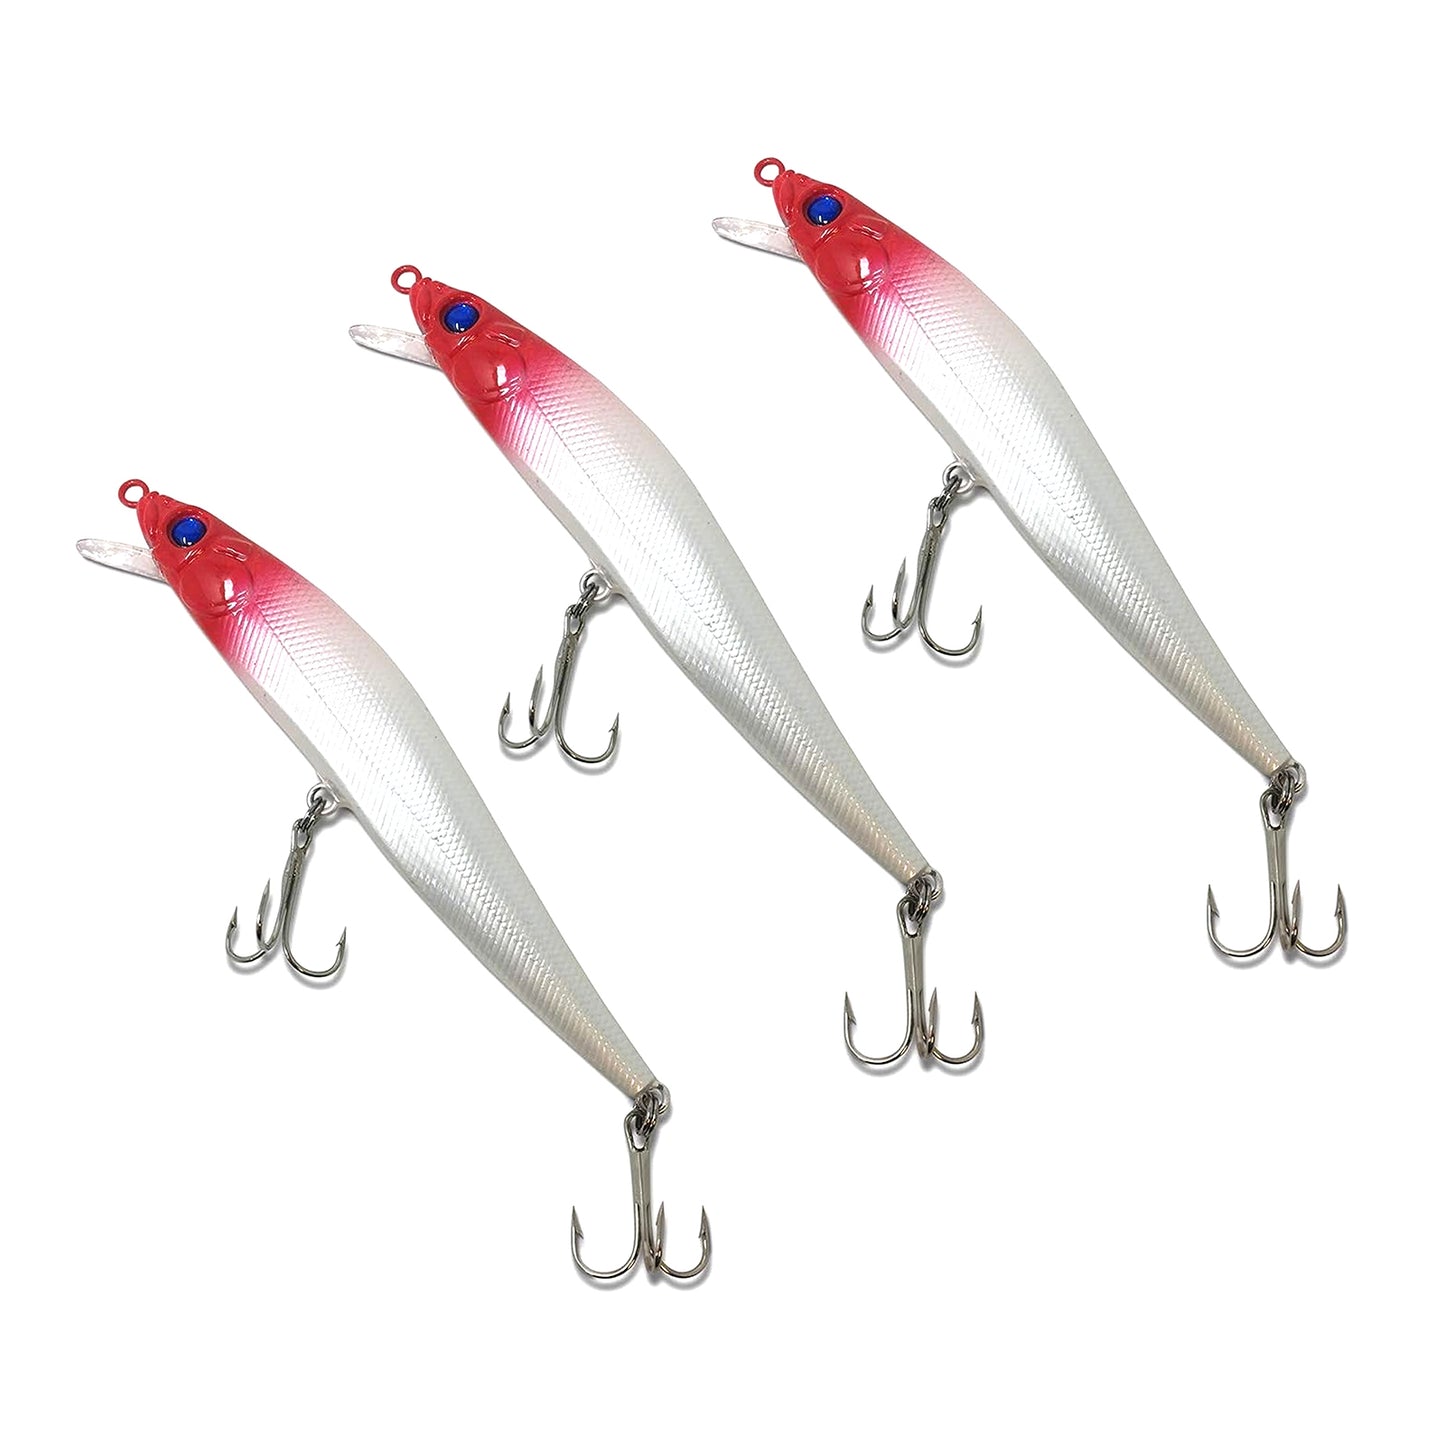 Four inch Fishing Lure with 2 Treble Hooks